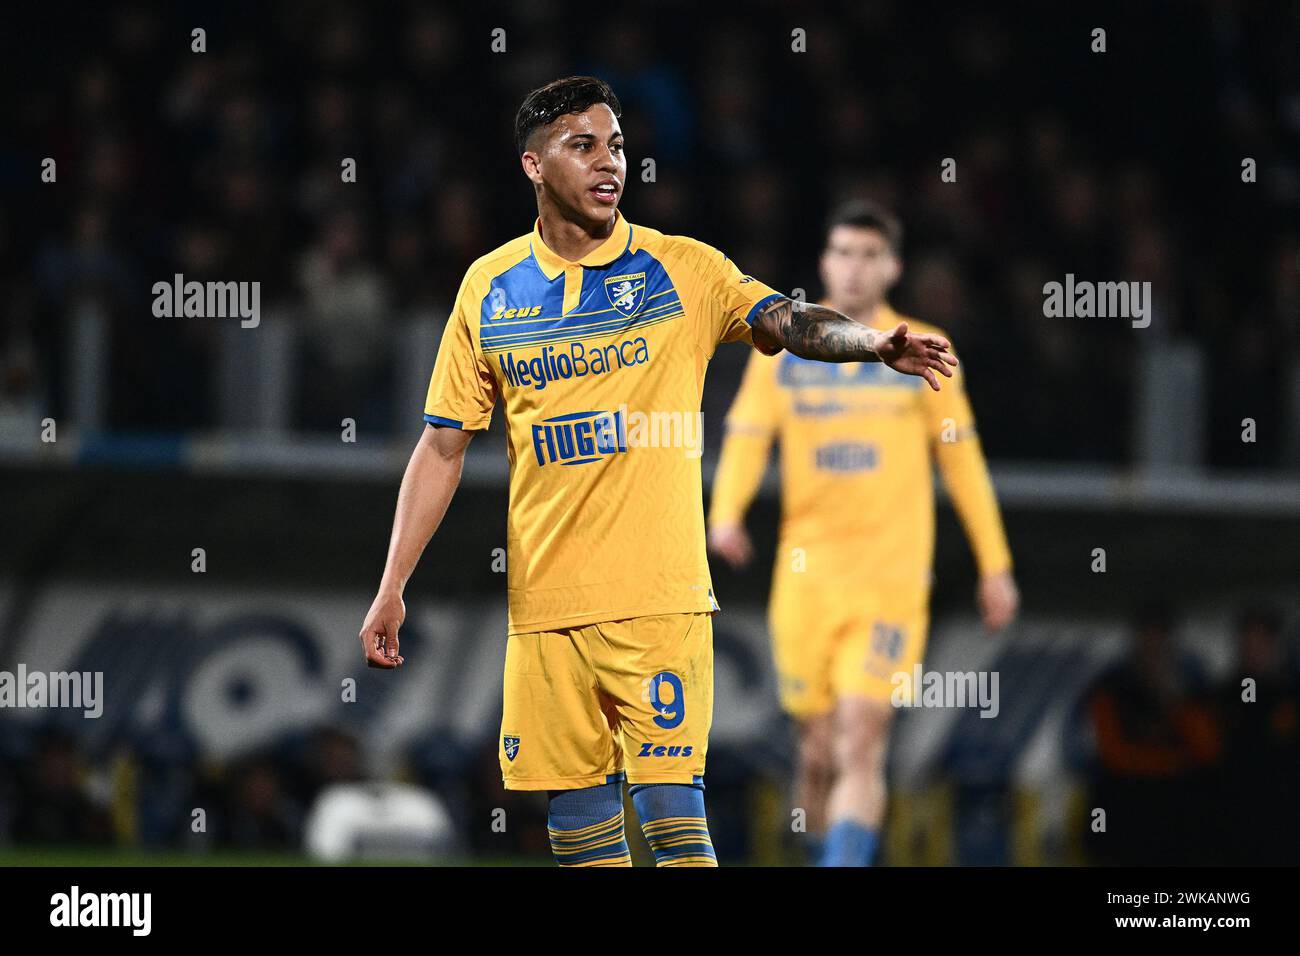 Kaio Jorge of Frosinone Calcio gestures during the Serie A match between Frosinone Calcio and AS Roma at Stadio Benito Stirpe Frosinone Italy on 18 Fe Stock Photo